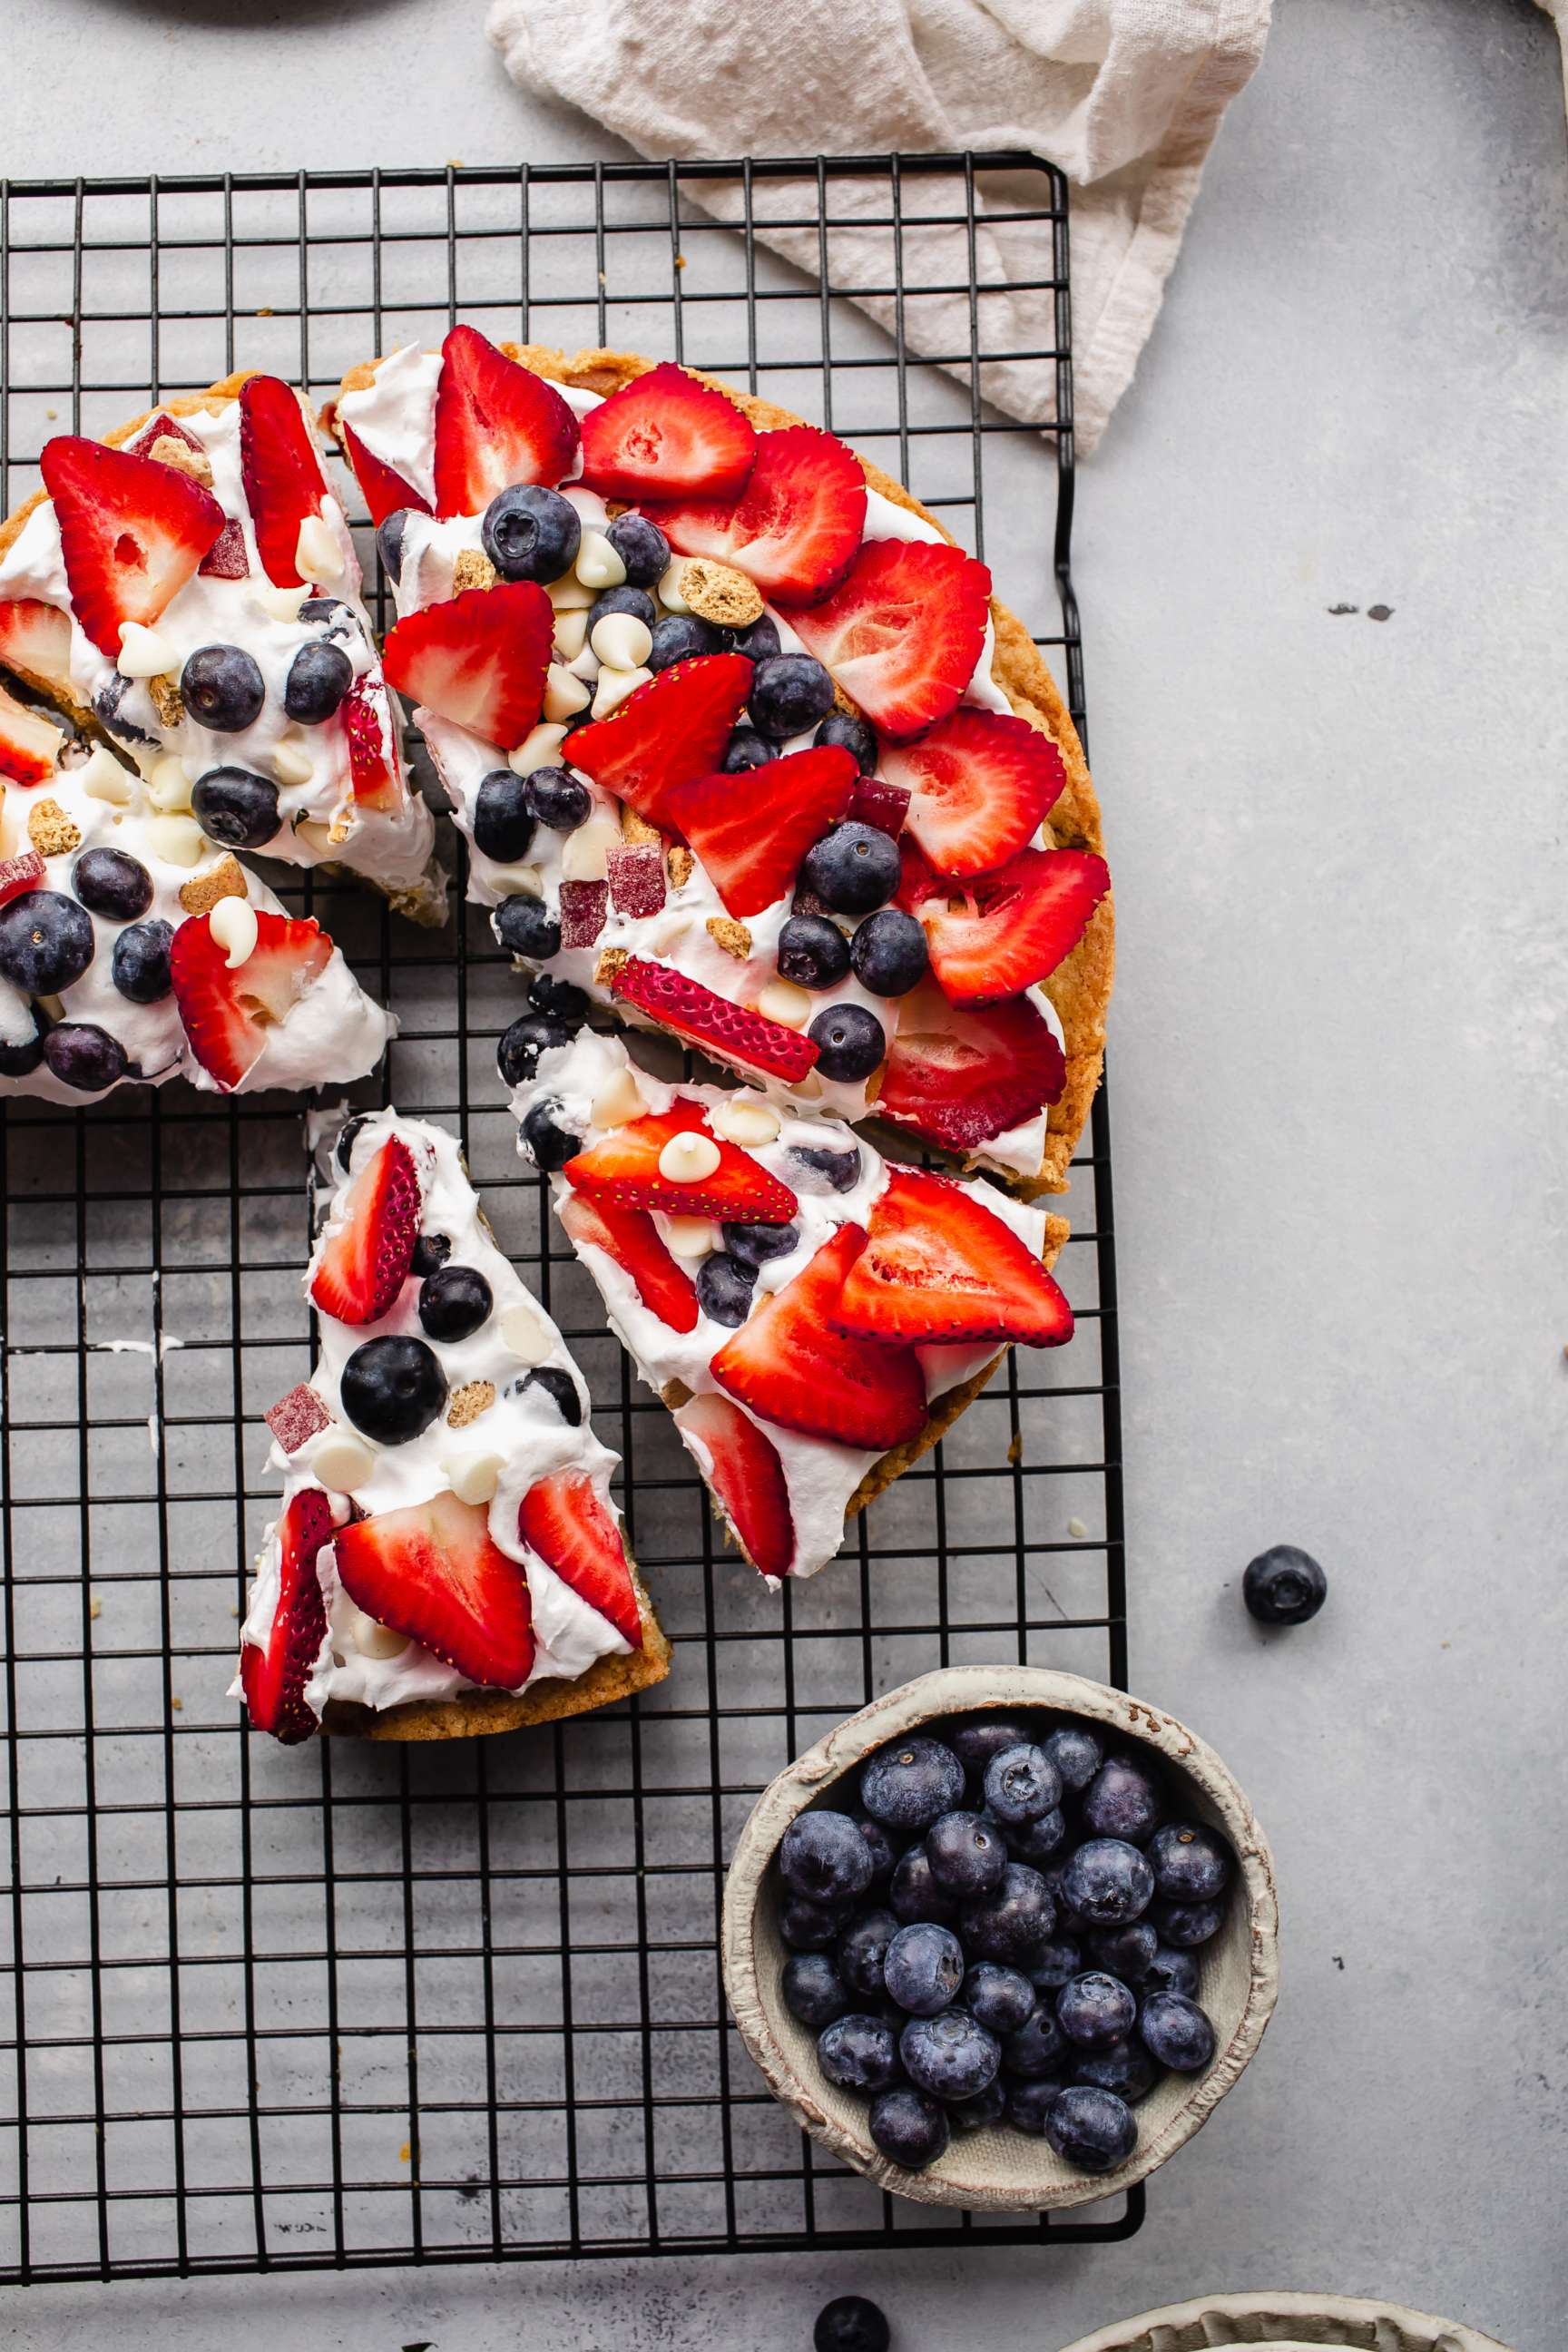 PHOTO: A baked dessert pizza with fresh berries and cream.